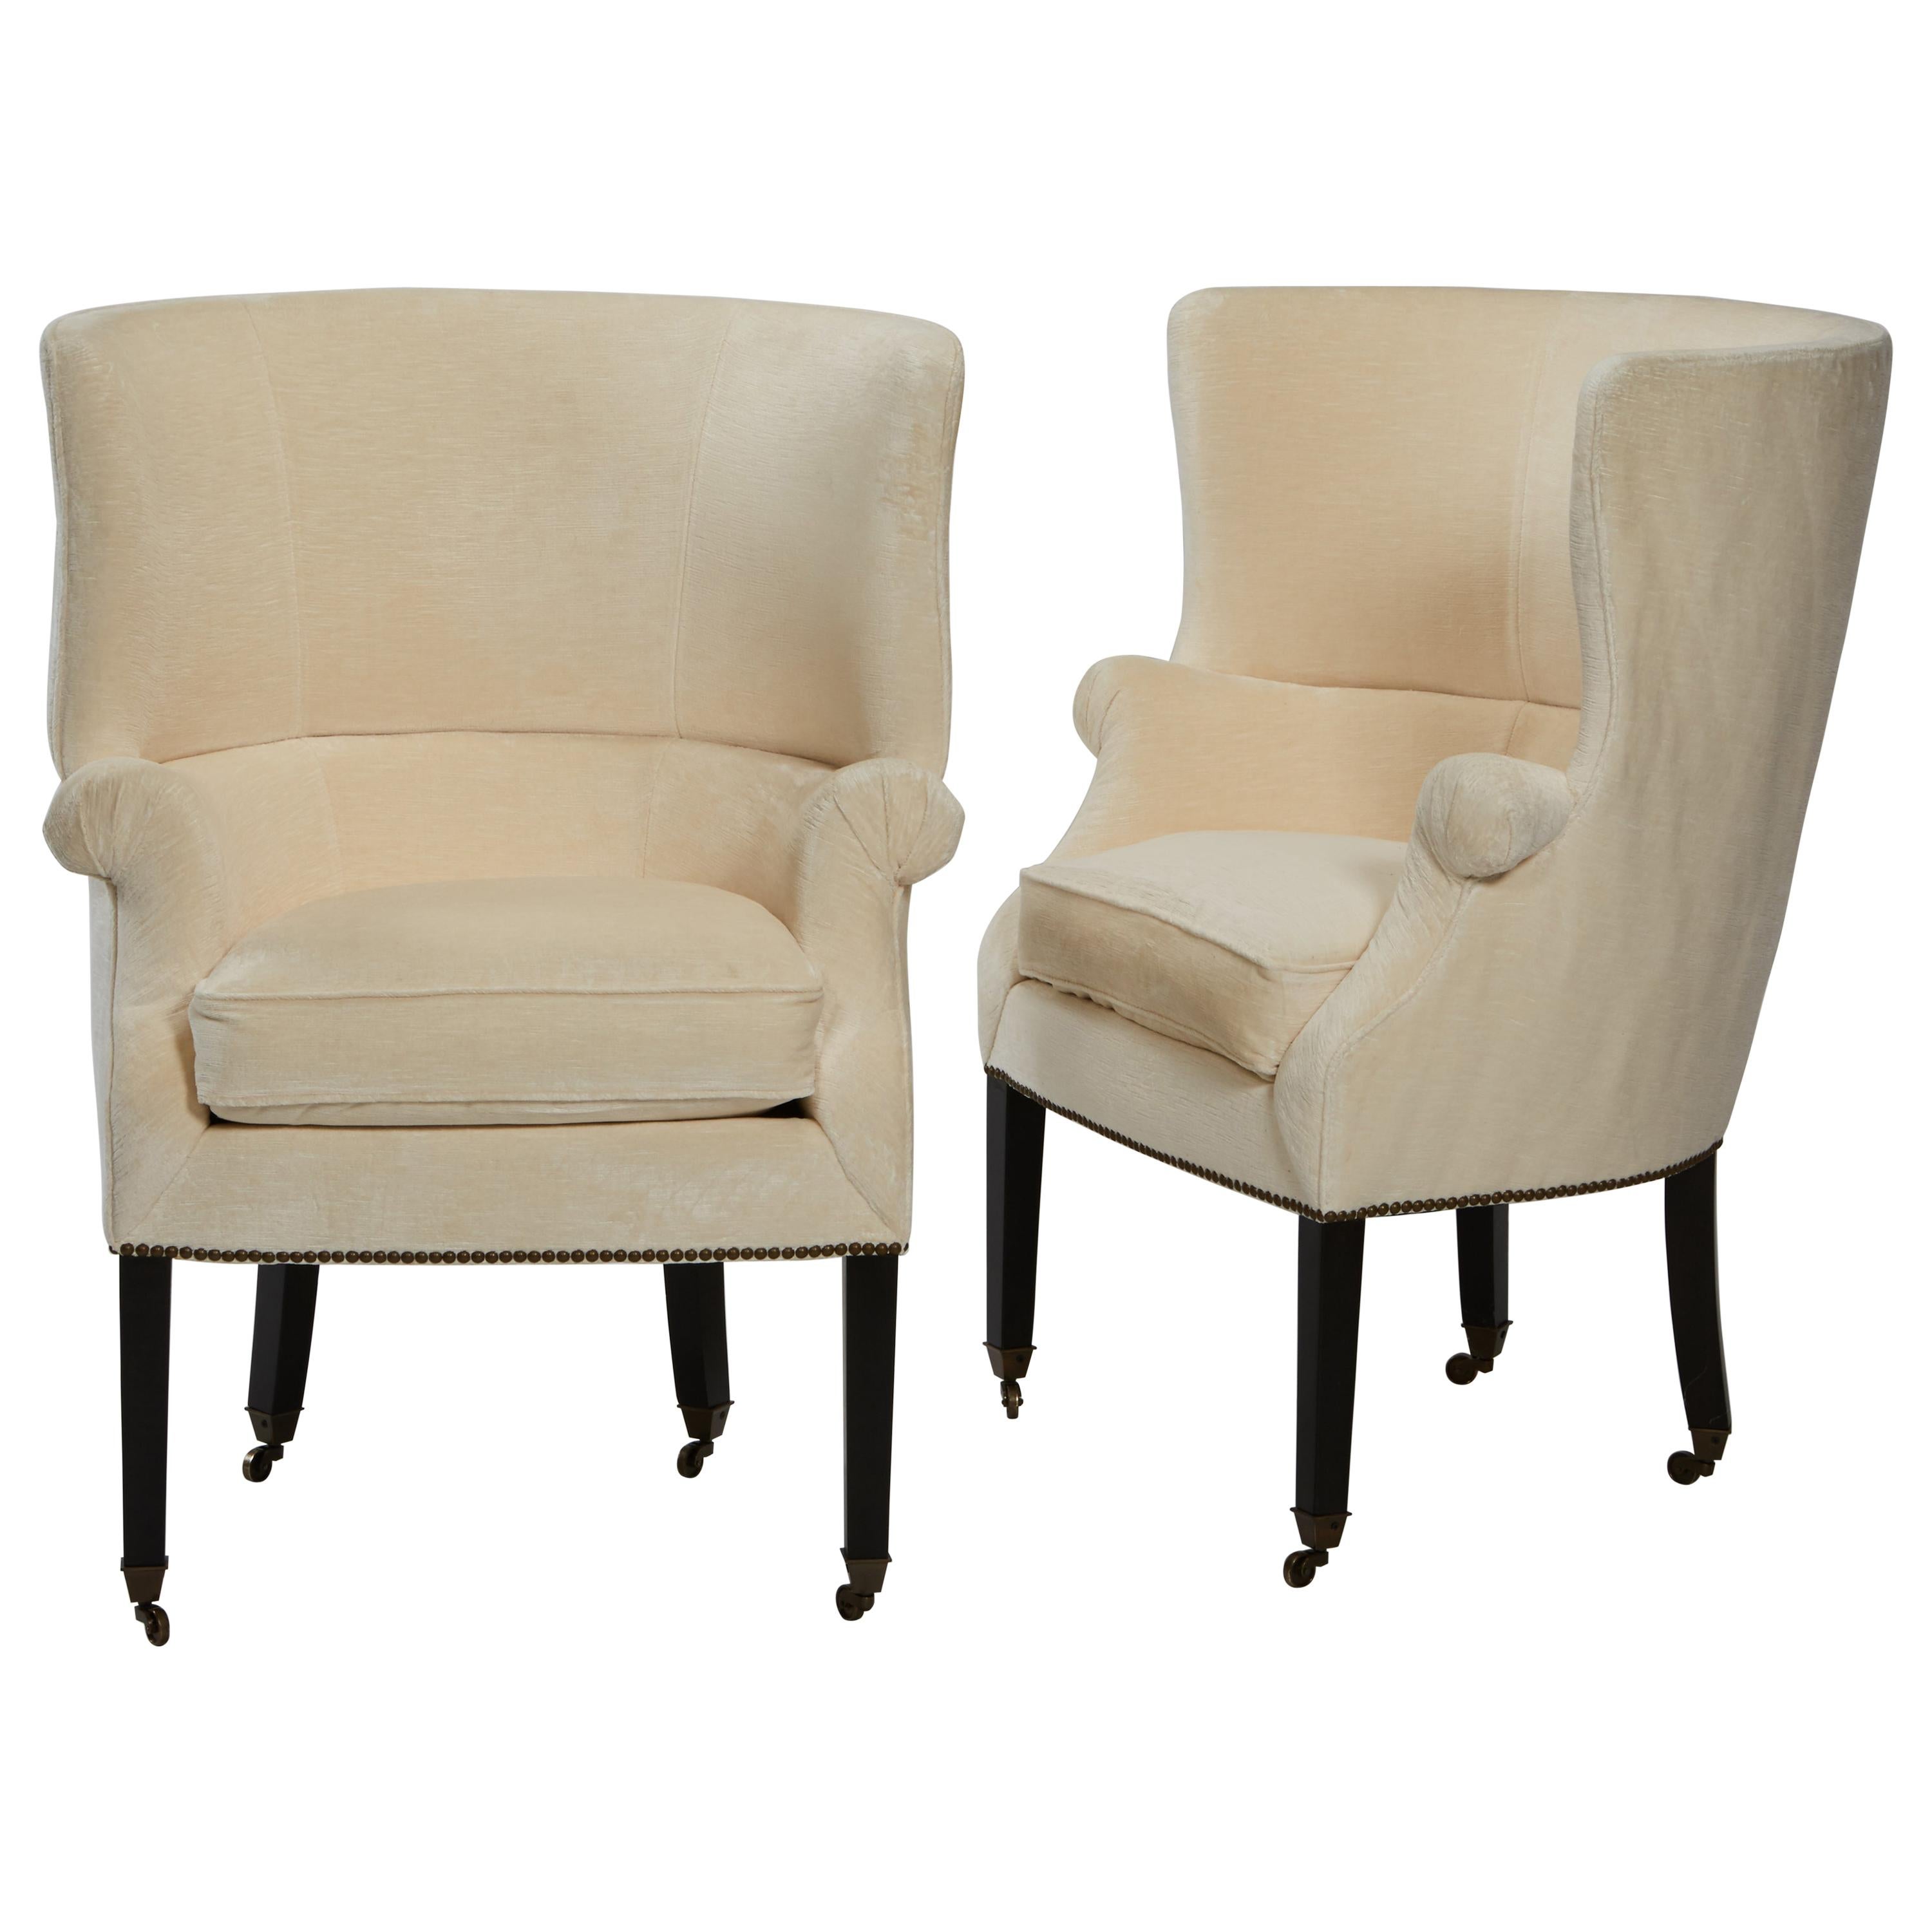 Pair of Victoria Hagan "Emma" Small Wingback Chairs in Hunt Off-White Velvet